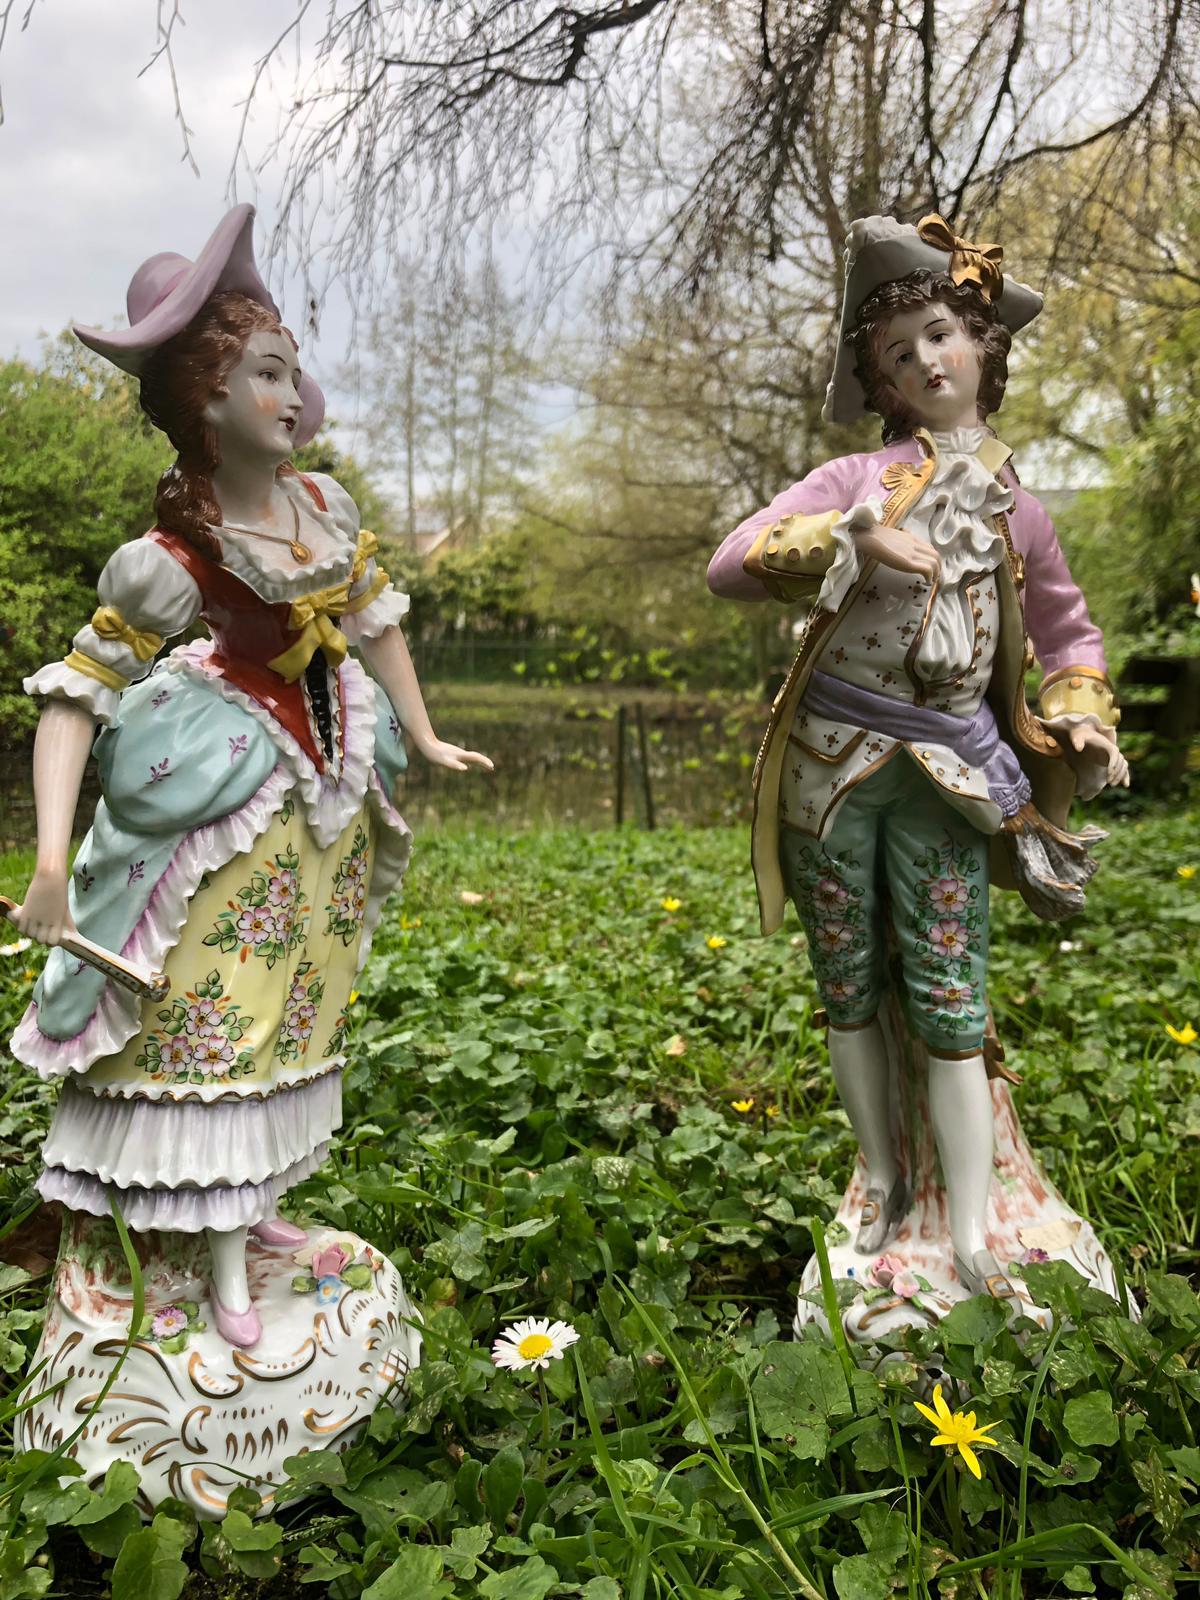 This porcelain couple is from the House of Sitzendorf. The items were made in German. The manufactory is from 1850. The figures are handmade from porcelain and painted in the features tones of green, yellow, purple and salmon. And many more